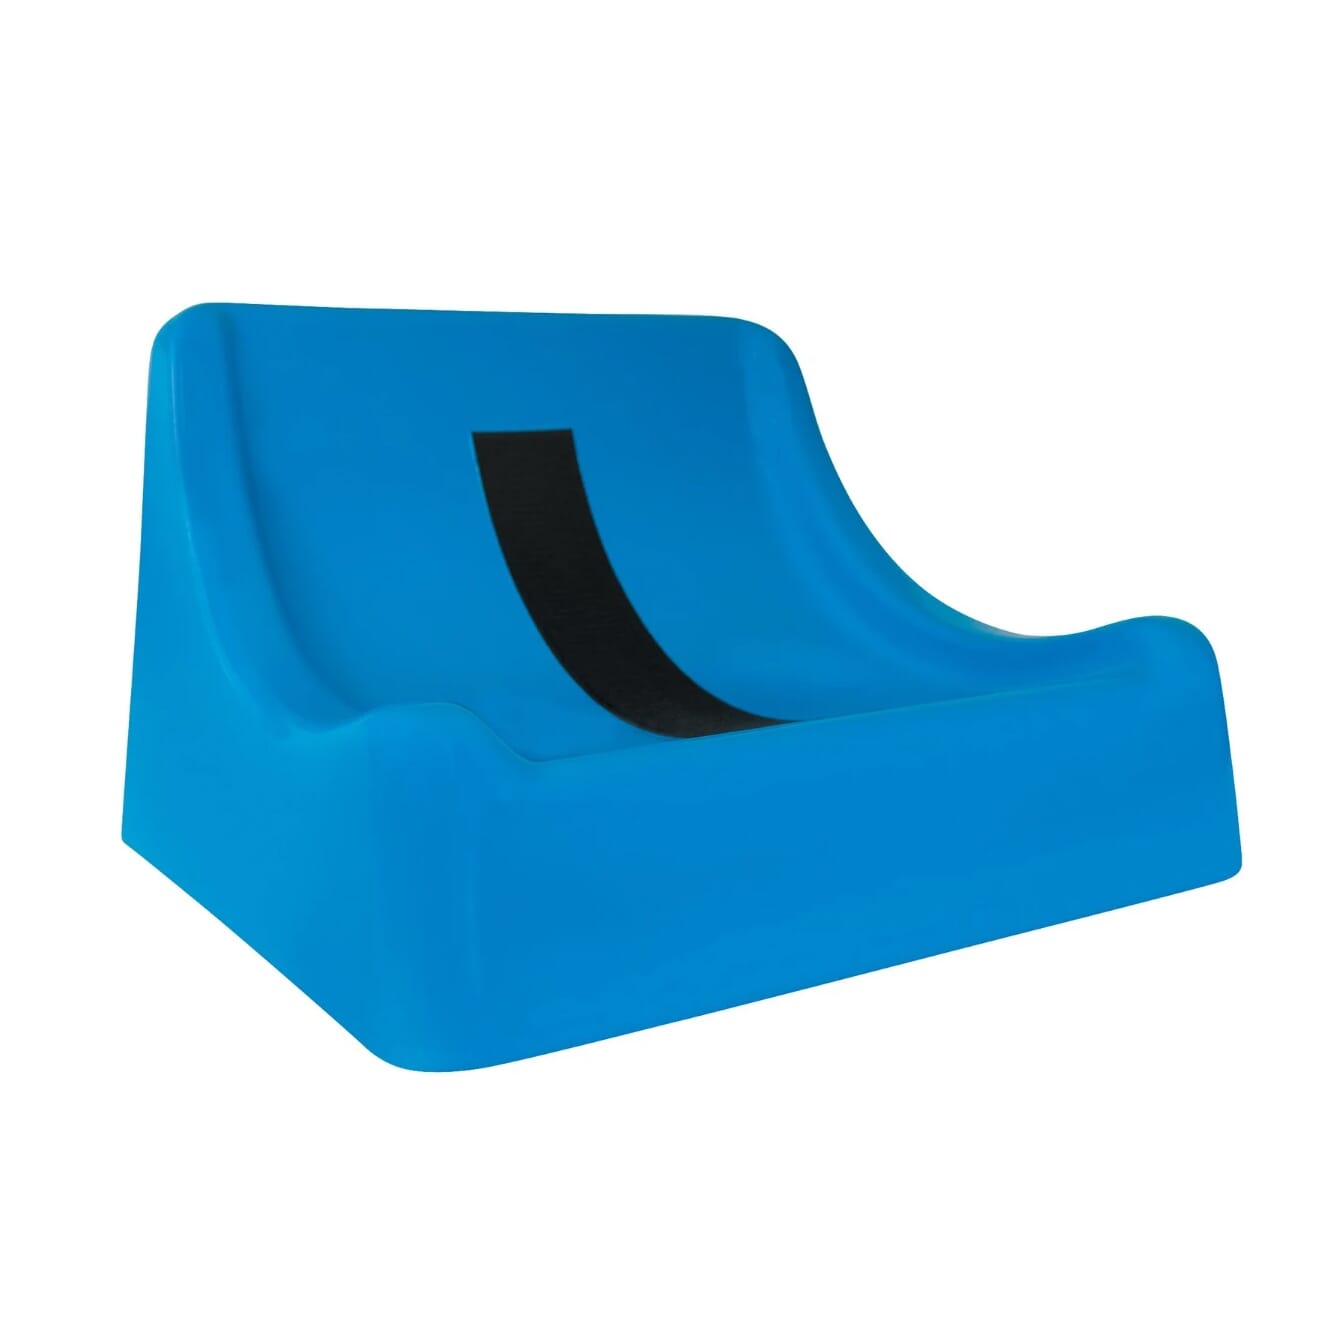 View Tumble Forms Floor Sitter Wedge Blue XLarge information